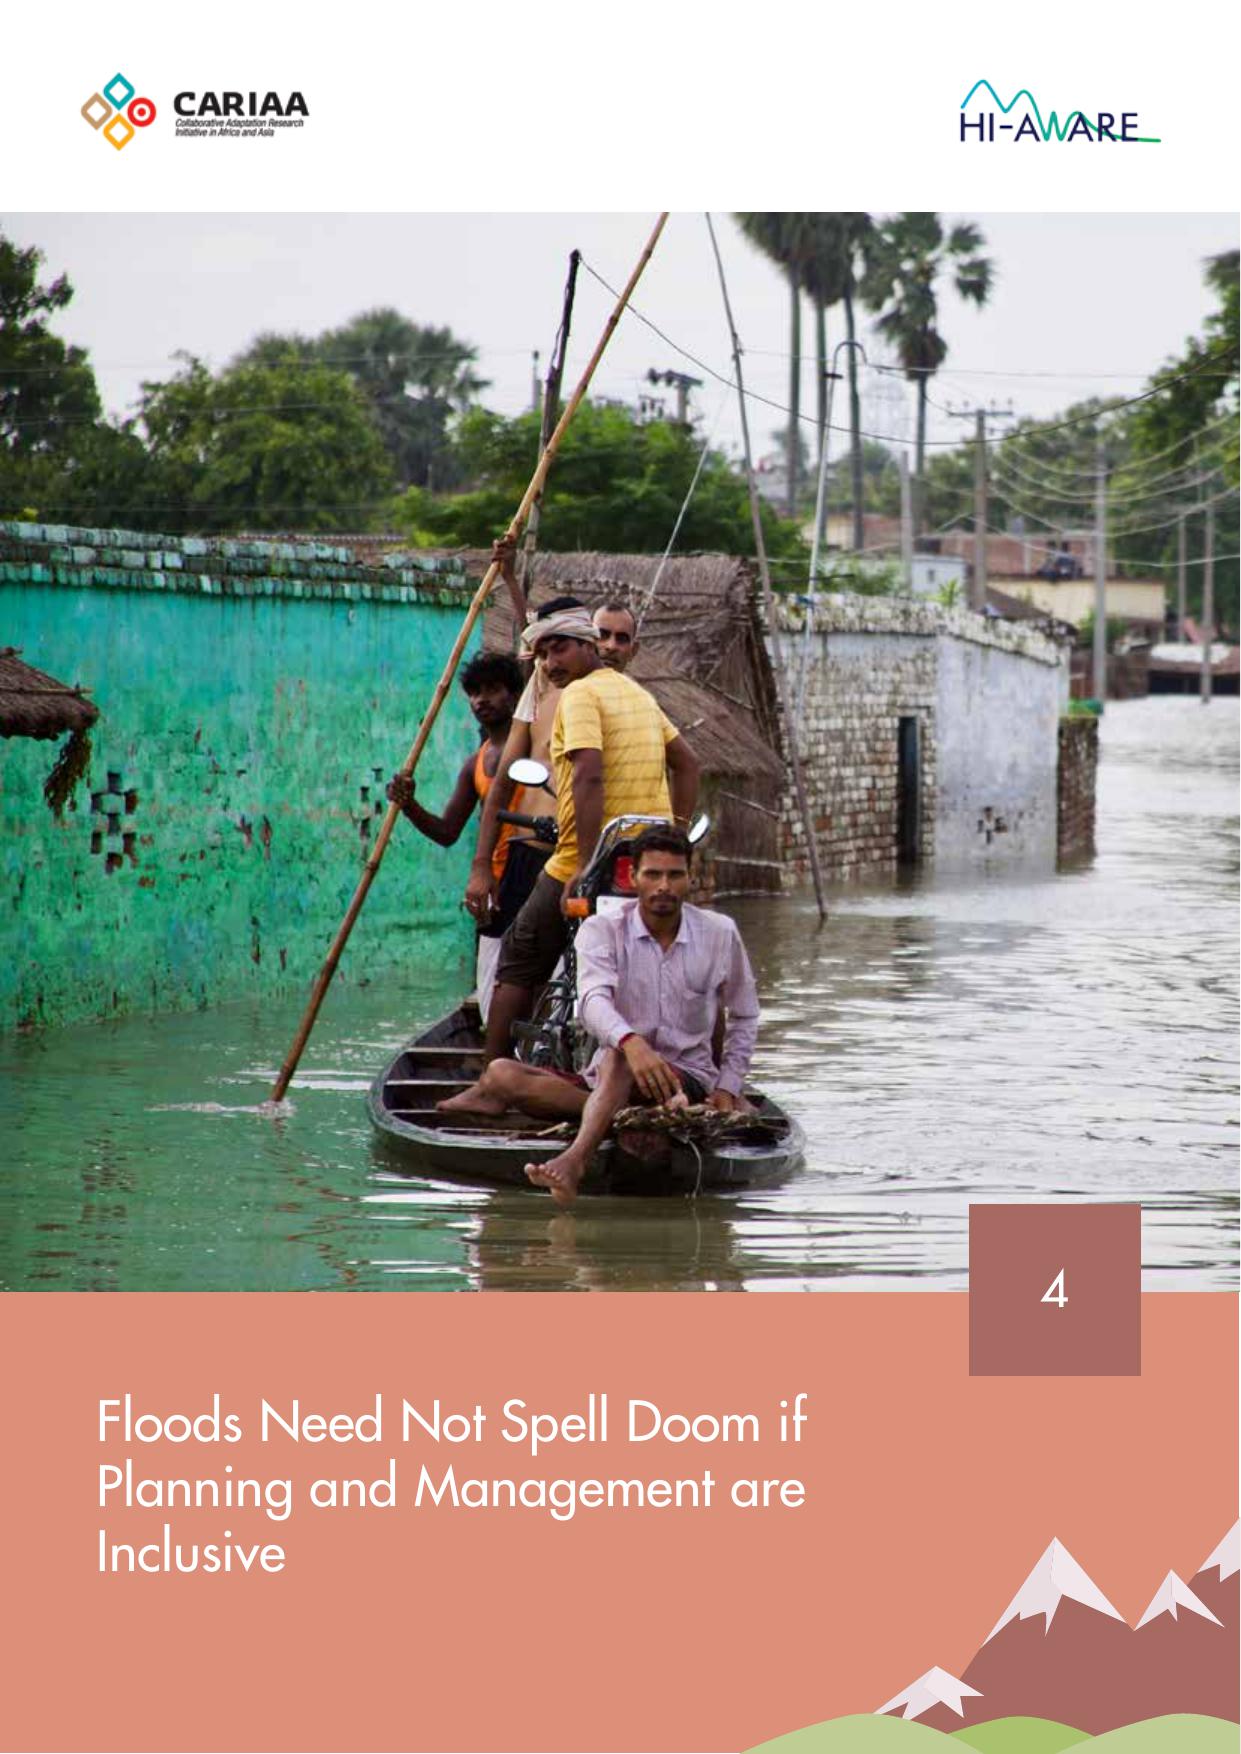 Floods need not spell doom if planning and management are inclusive